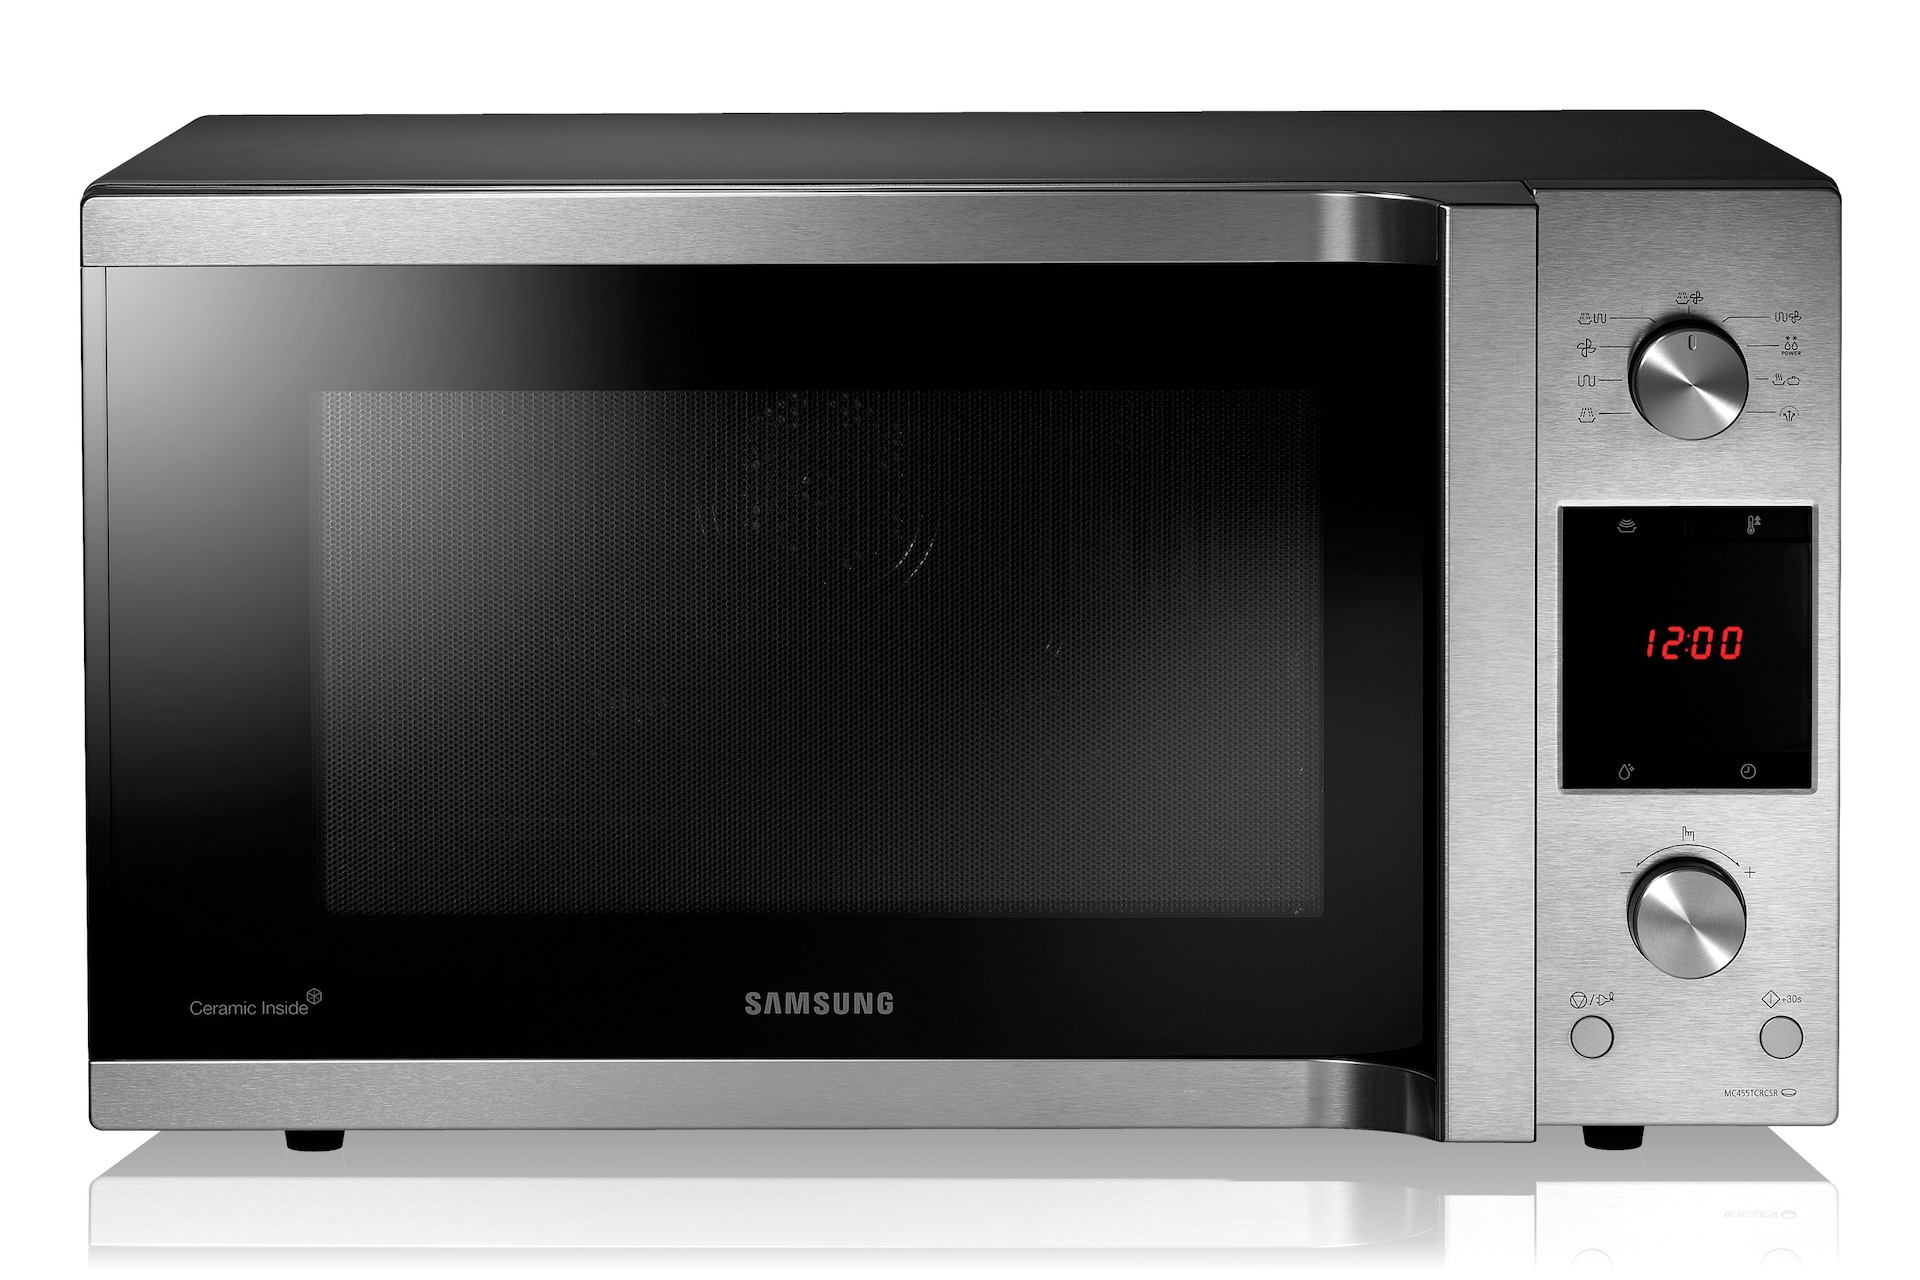 Samsung 45L, Convection, Microwave Oven, with Sensor Cook Technology and Steam Clean, MC456TBRCSR in Black